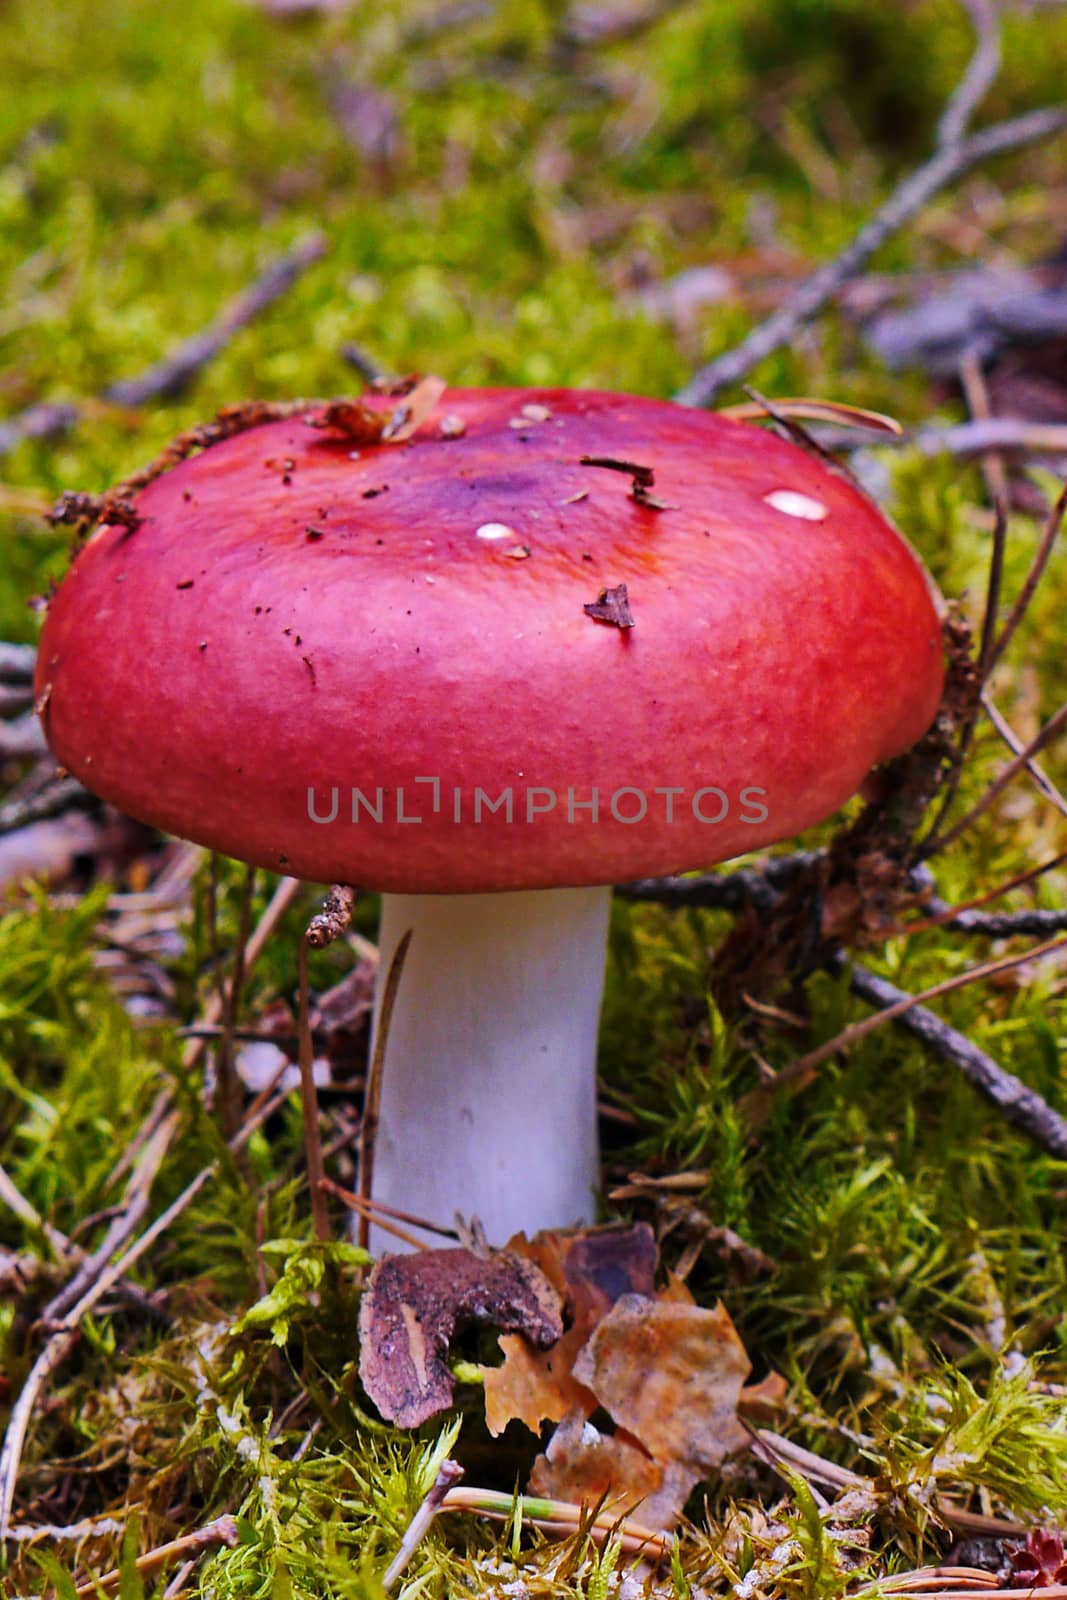 A beautiful mushroom with a bright red hat on a green carpet of their moss